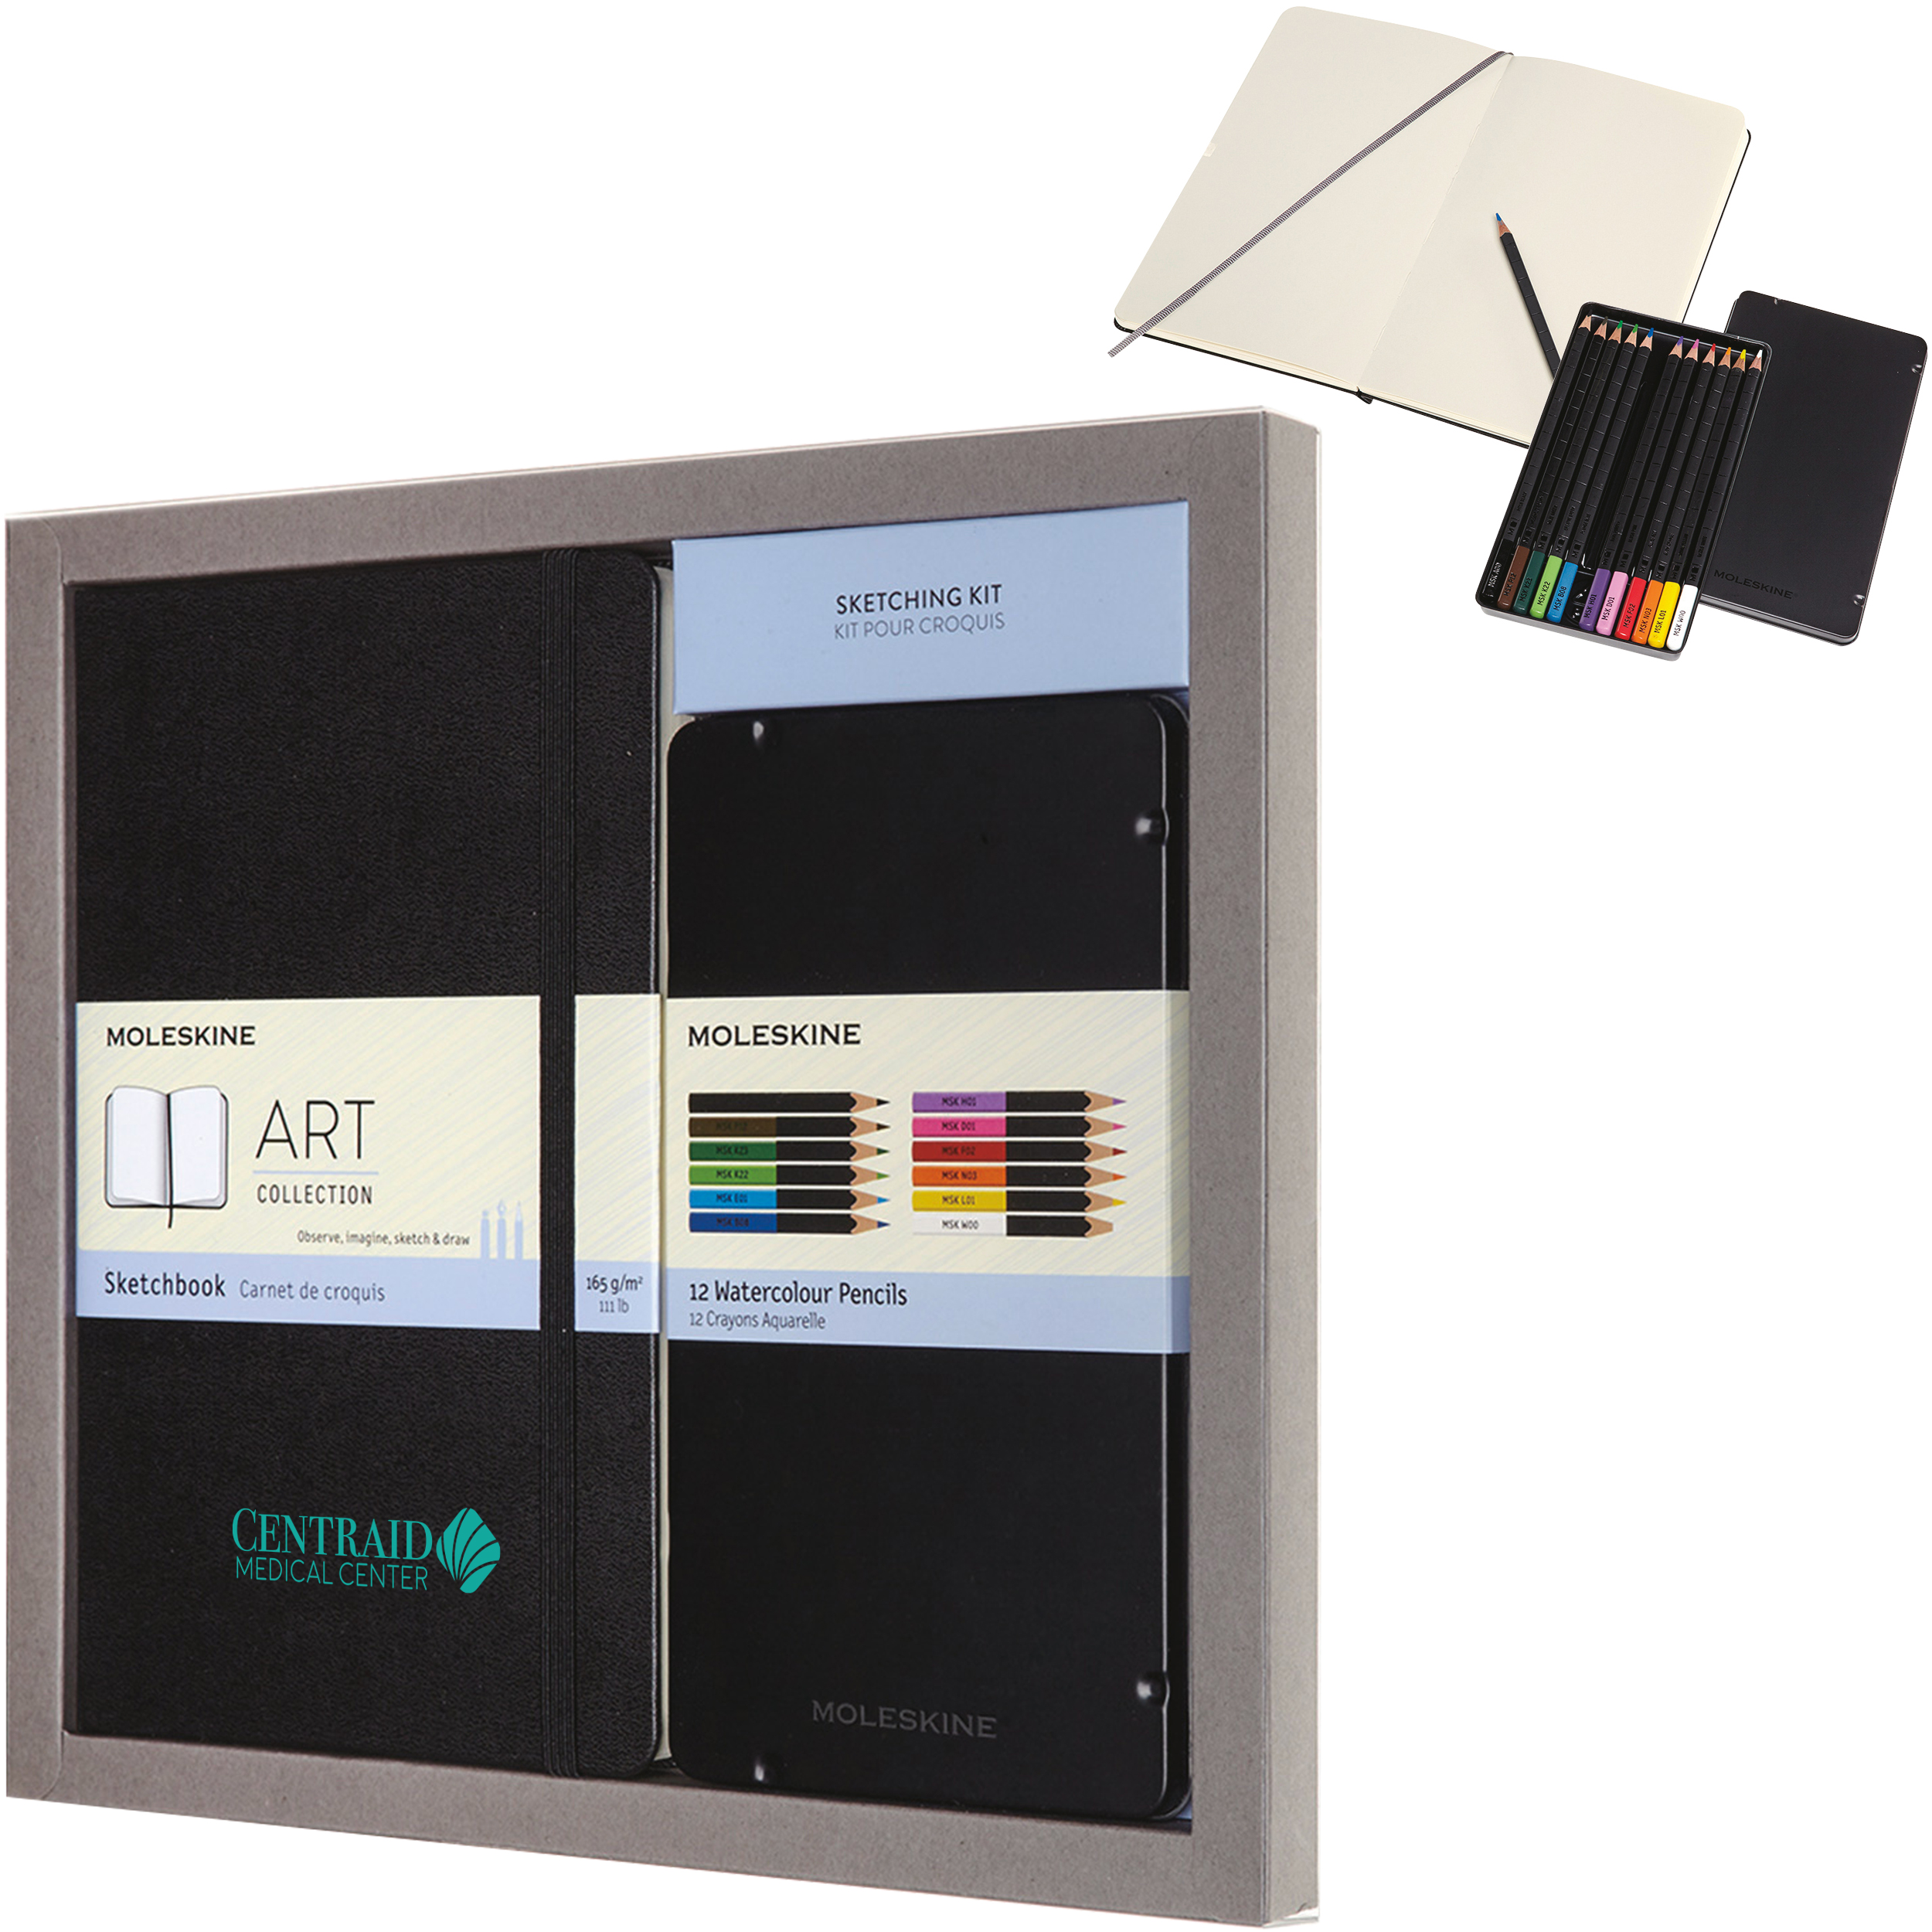 Journal, Jotter & Padfolio Gift Sets by Business Gifts, Promotional  Products, Customized Appreciation Gifts